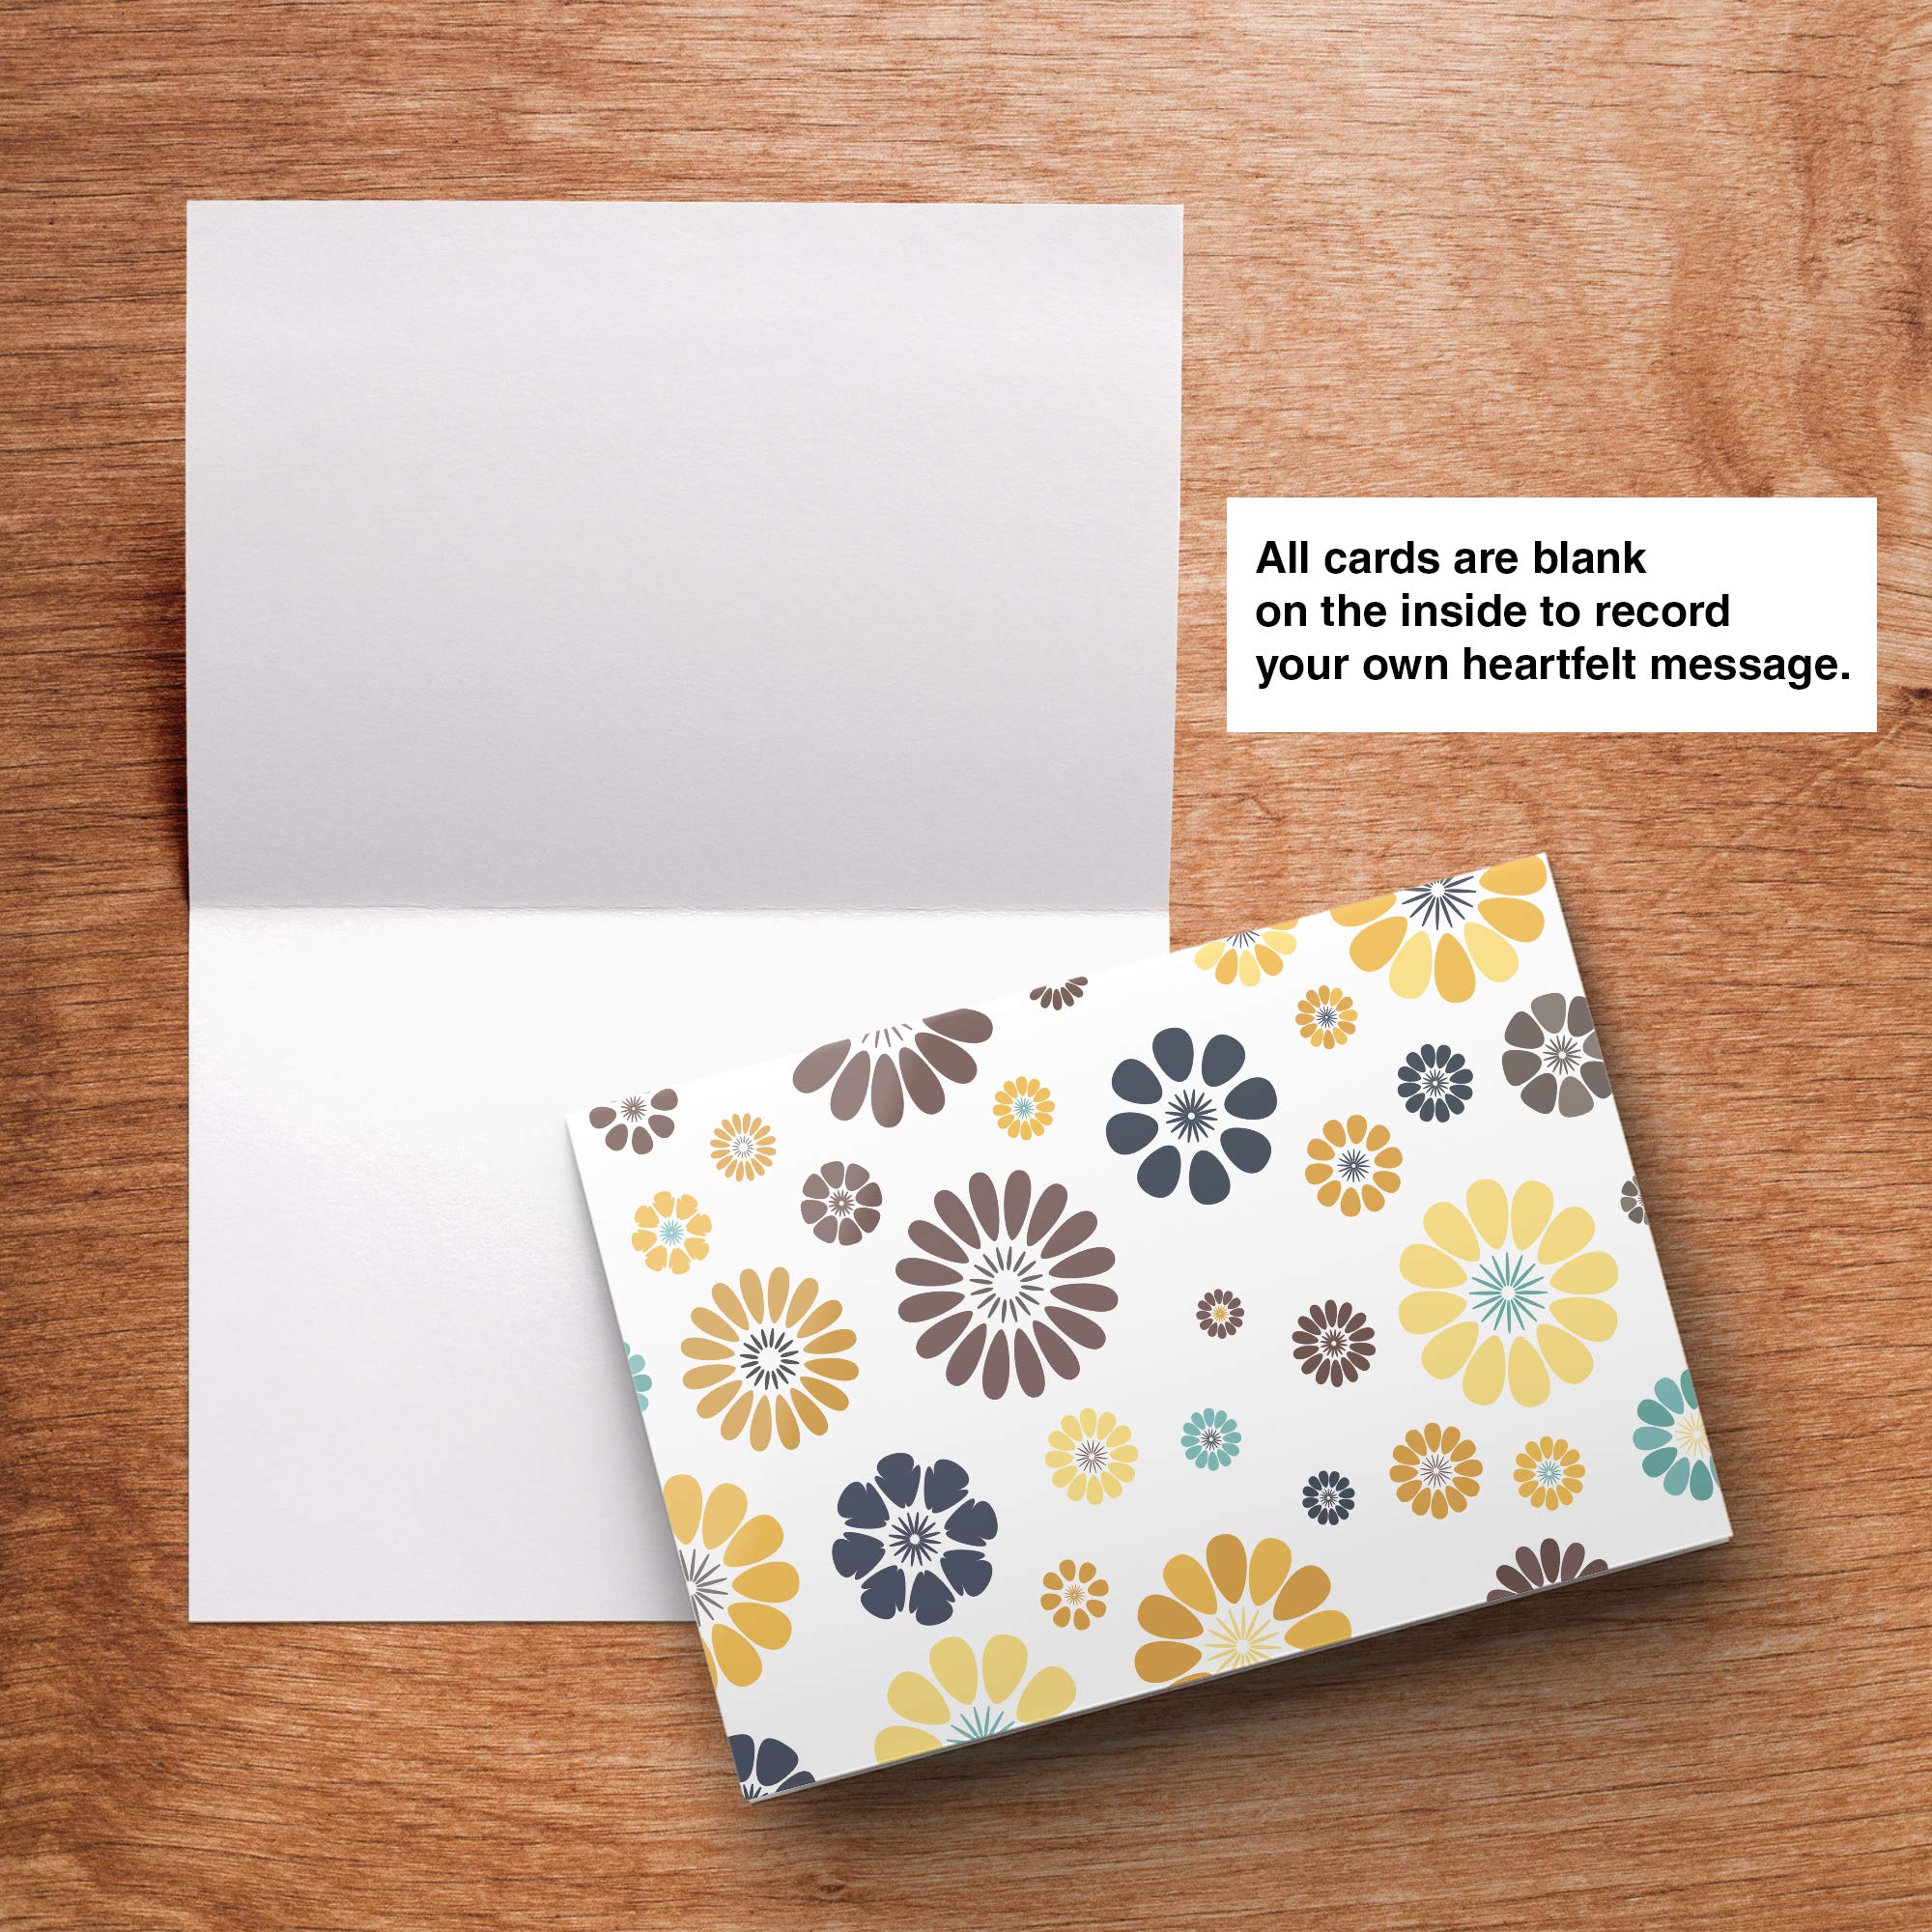 Dessie 100 Unique Blank Cards With Envelopes All Occasion - 4x6 Inch Blank Greeting Cards w/Colored Envelopes & Gold Seals. No Repetition. Note Cards with Envelopes Set